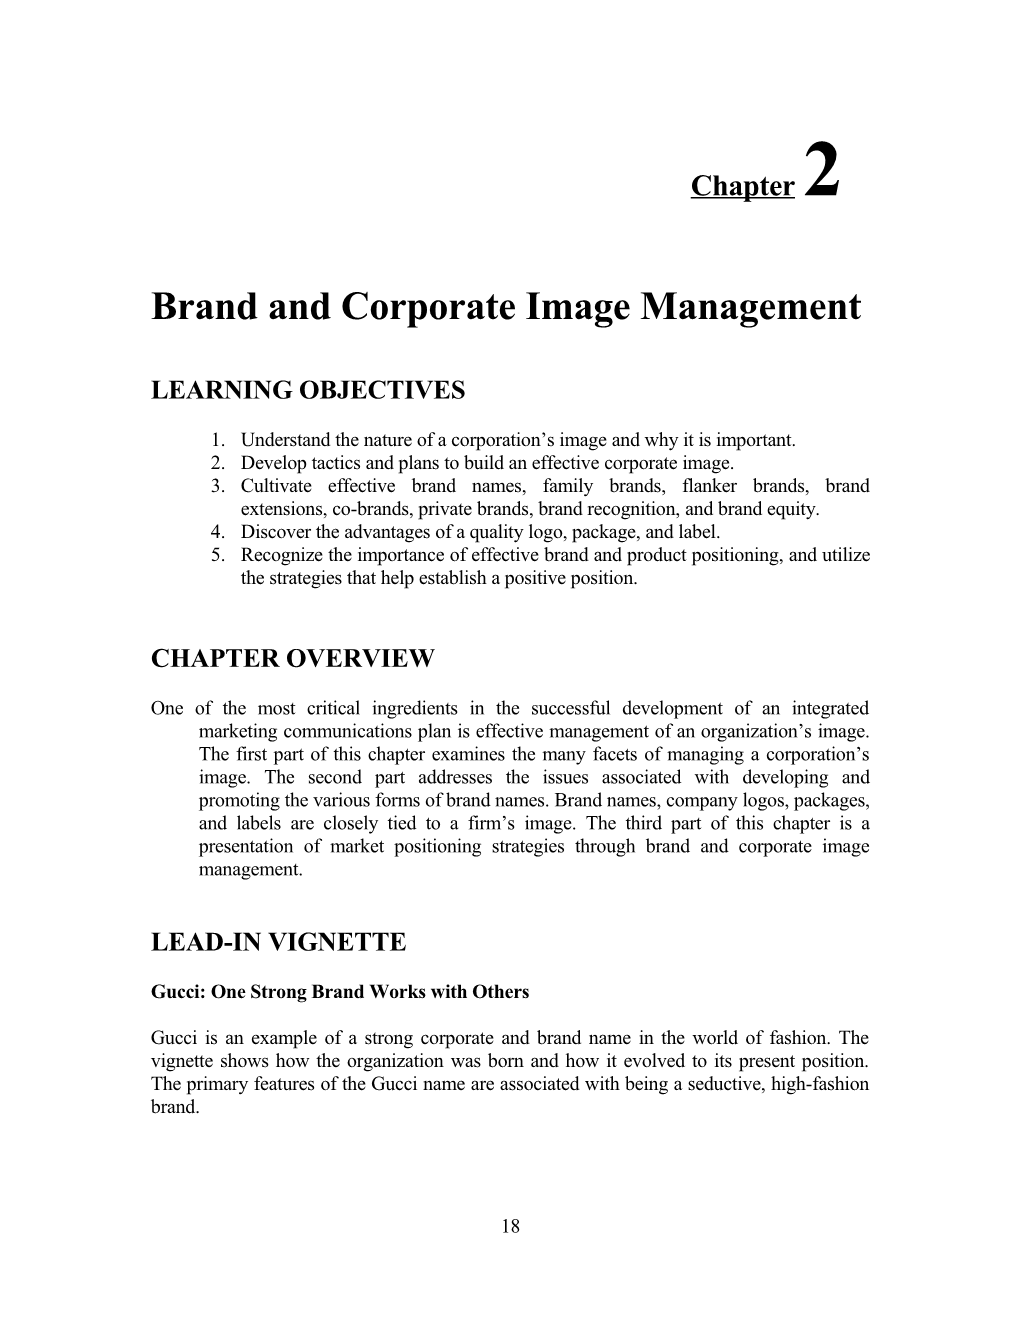 Brand and Corporate Image Management